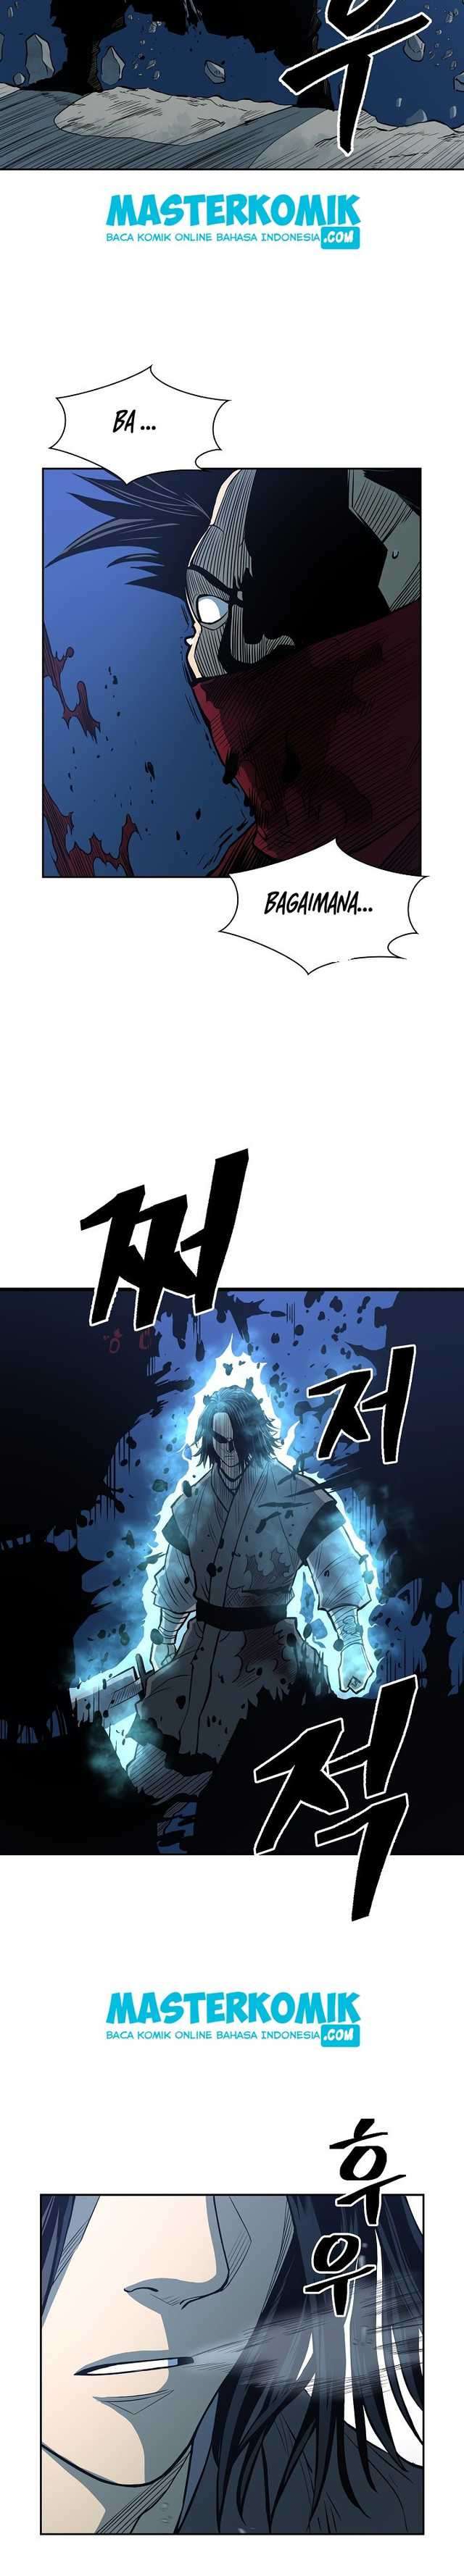 Record of the War God Chapter 86